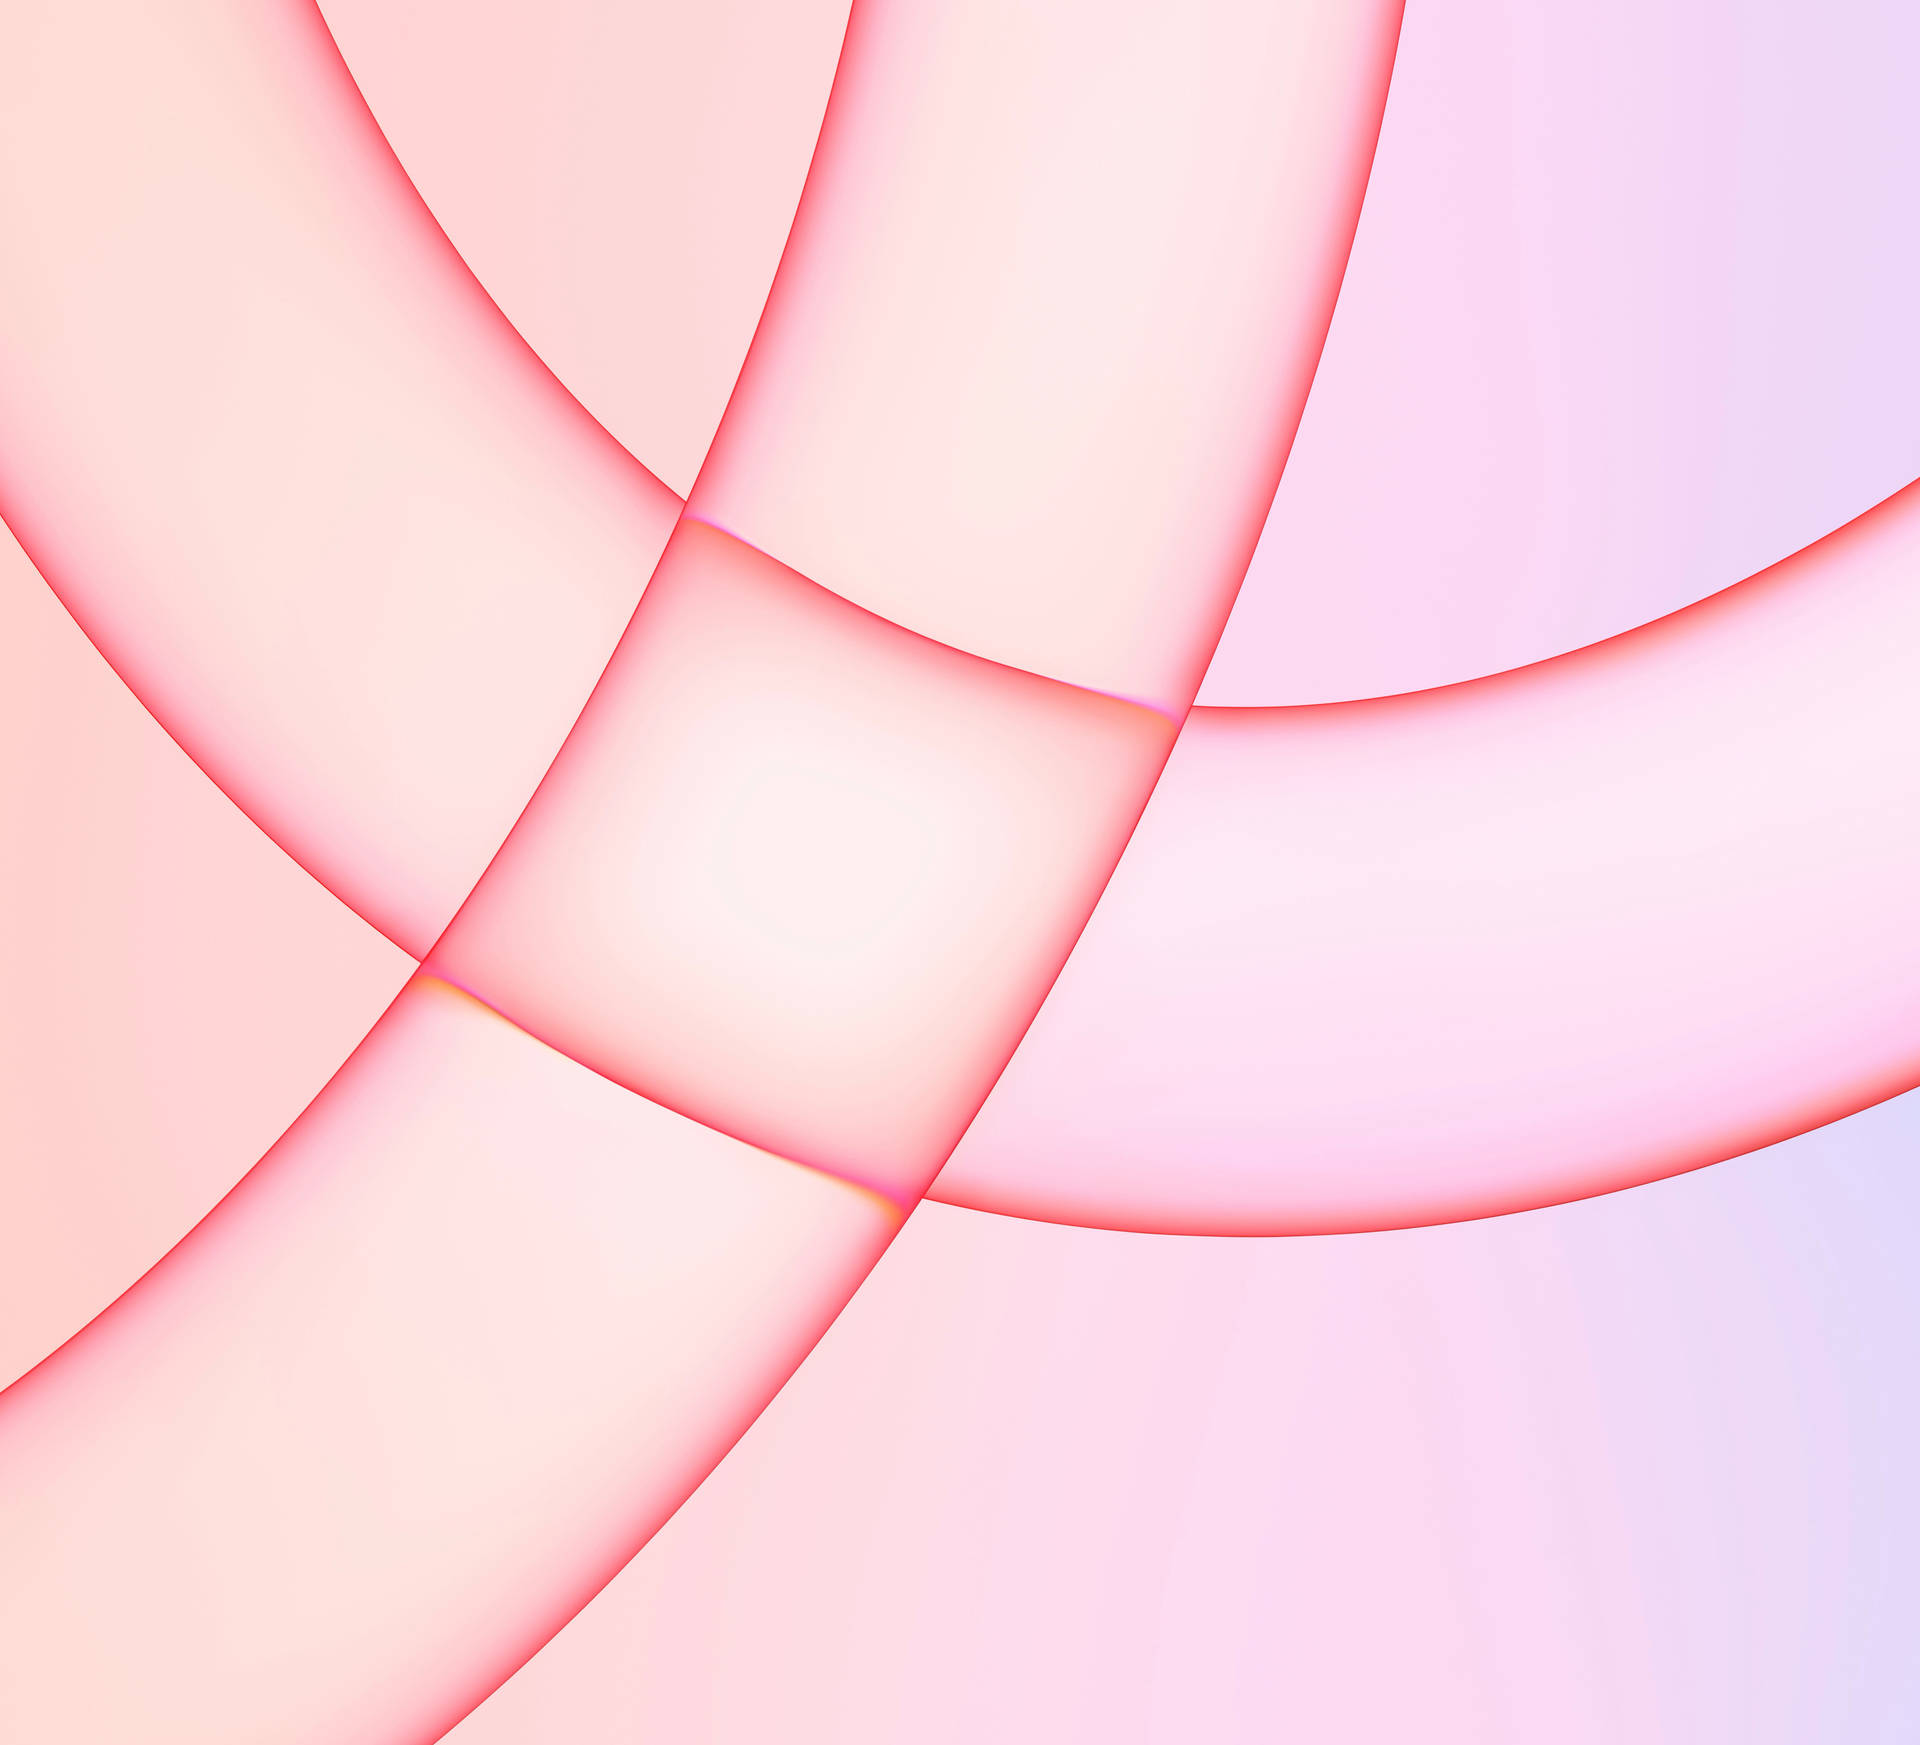 Light Pink Background With Lines iMac 4K Wallpaper